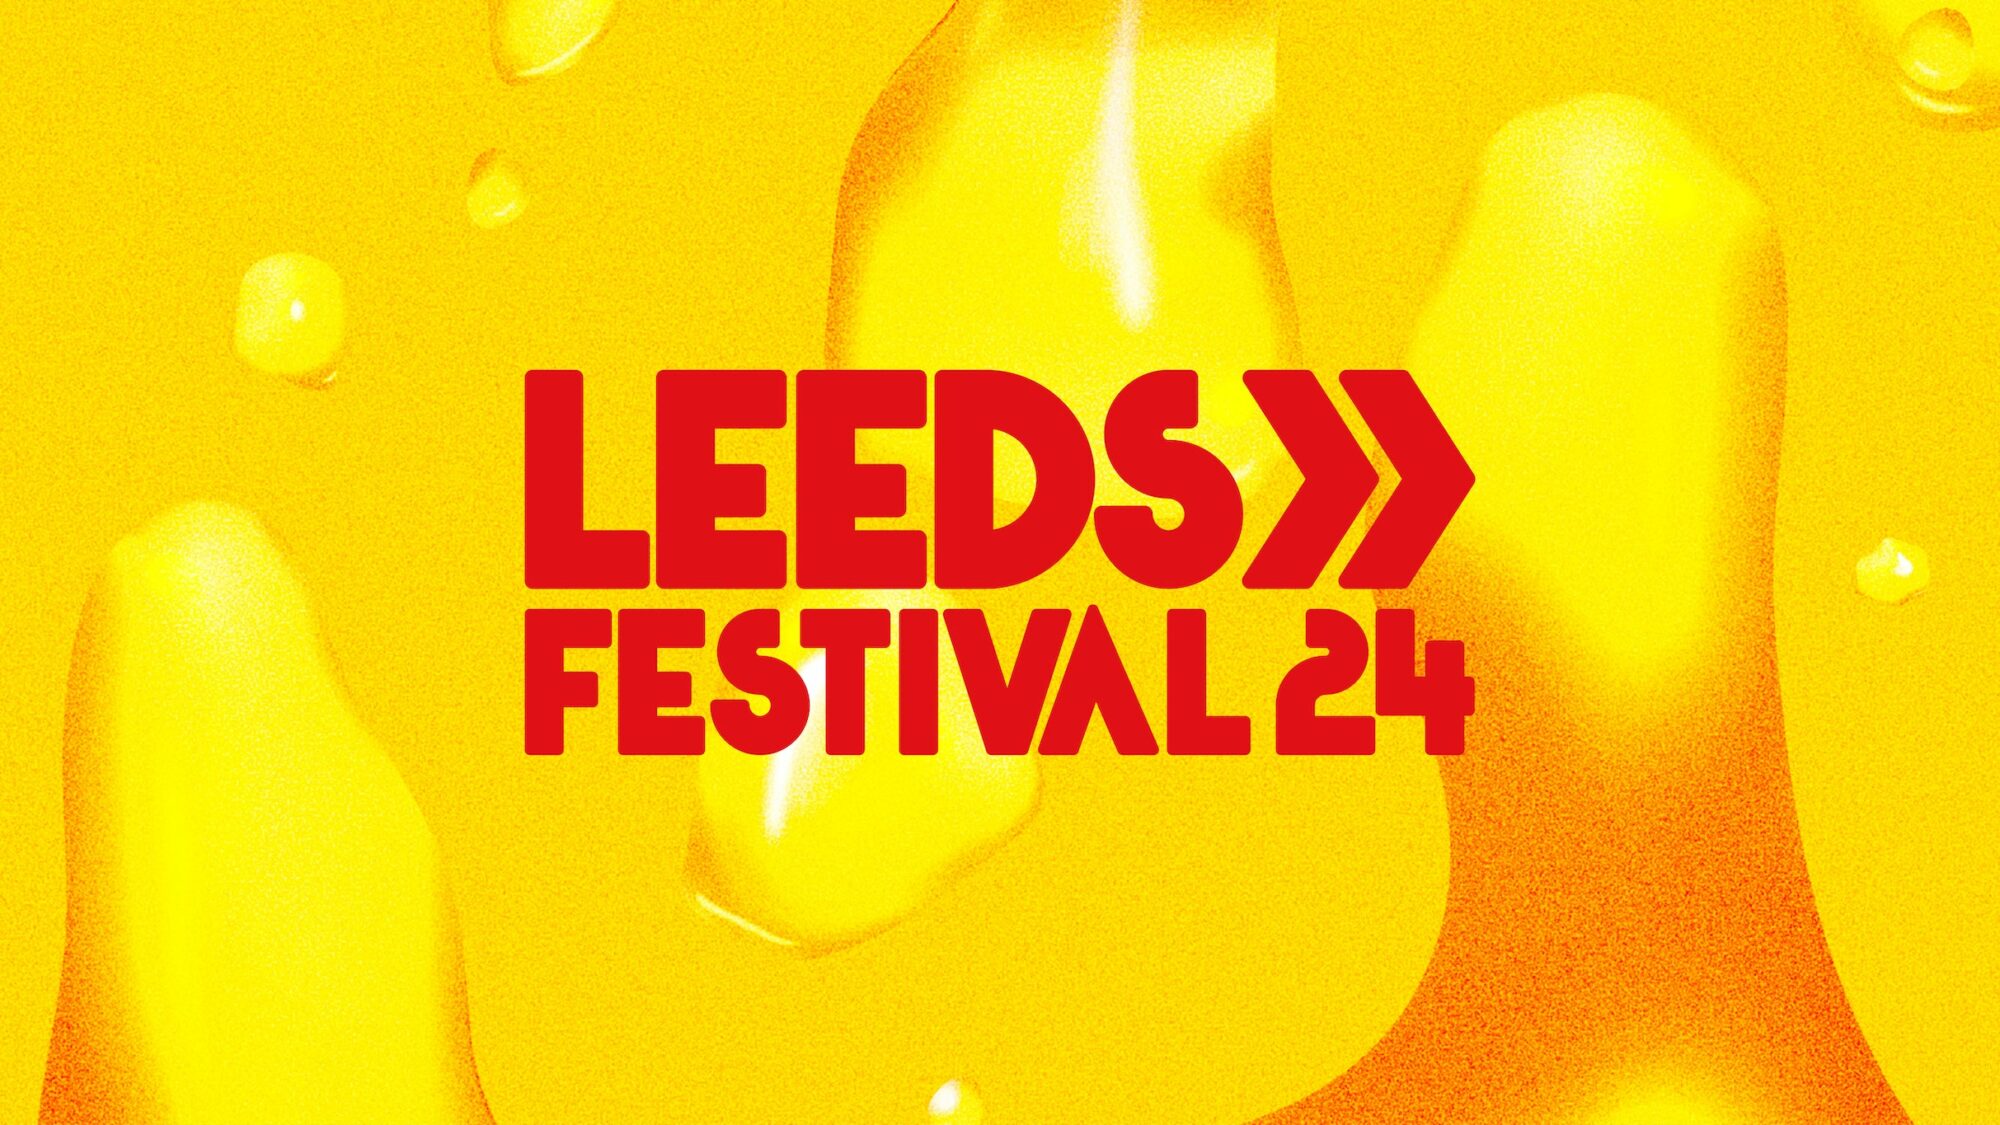 Image name Leeds Camping Plus 2024 Bring Your Own Tent at Bramham Park Leeds the 14 image from the post Leeds Festival 2024 - Weekend Payment Plan at Bramham Park, Leeds in Yorkshire.com.